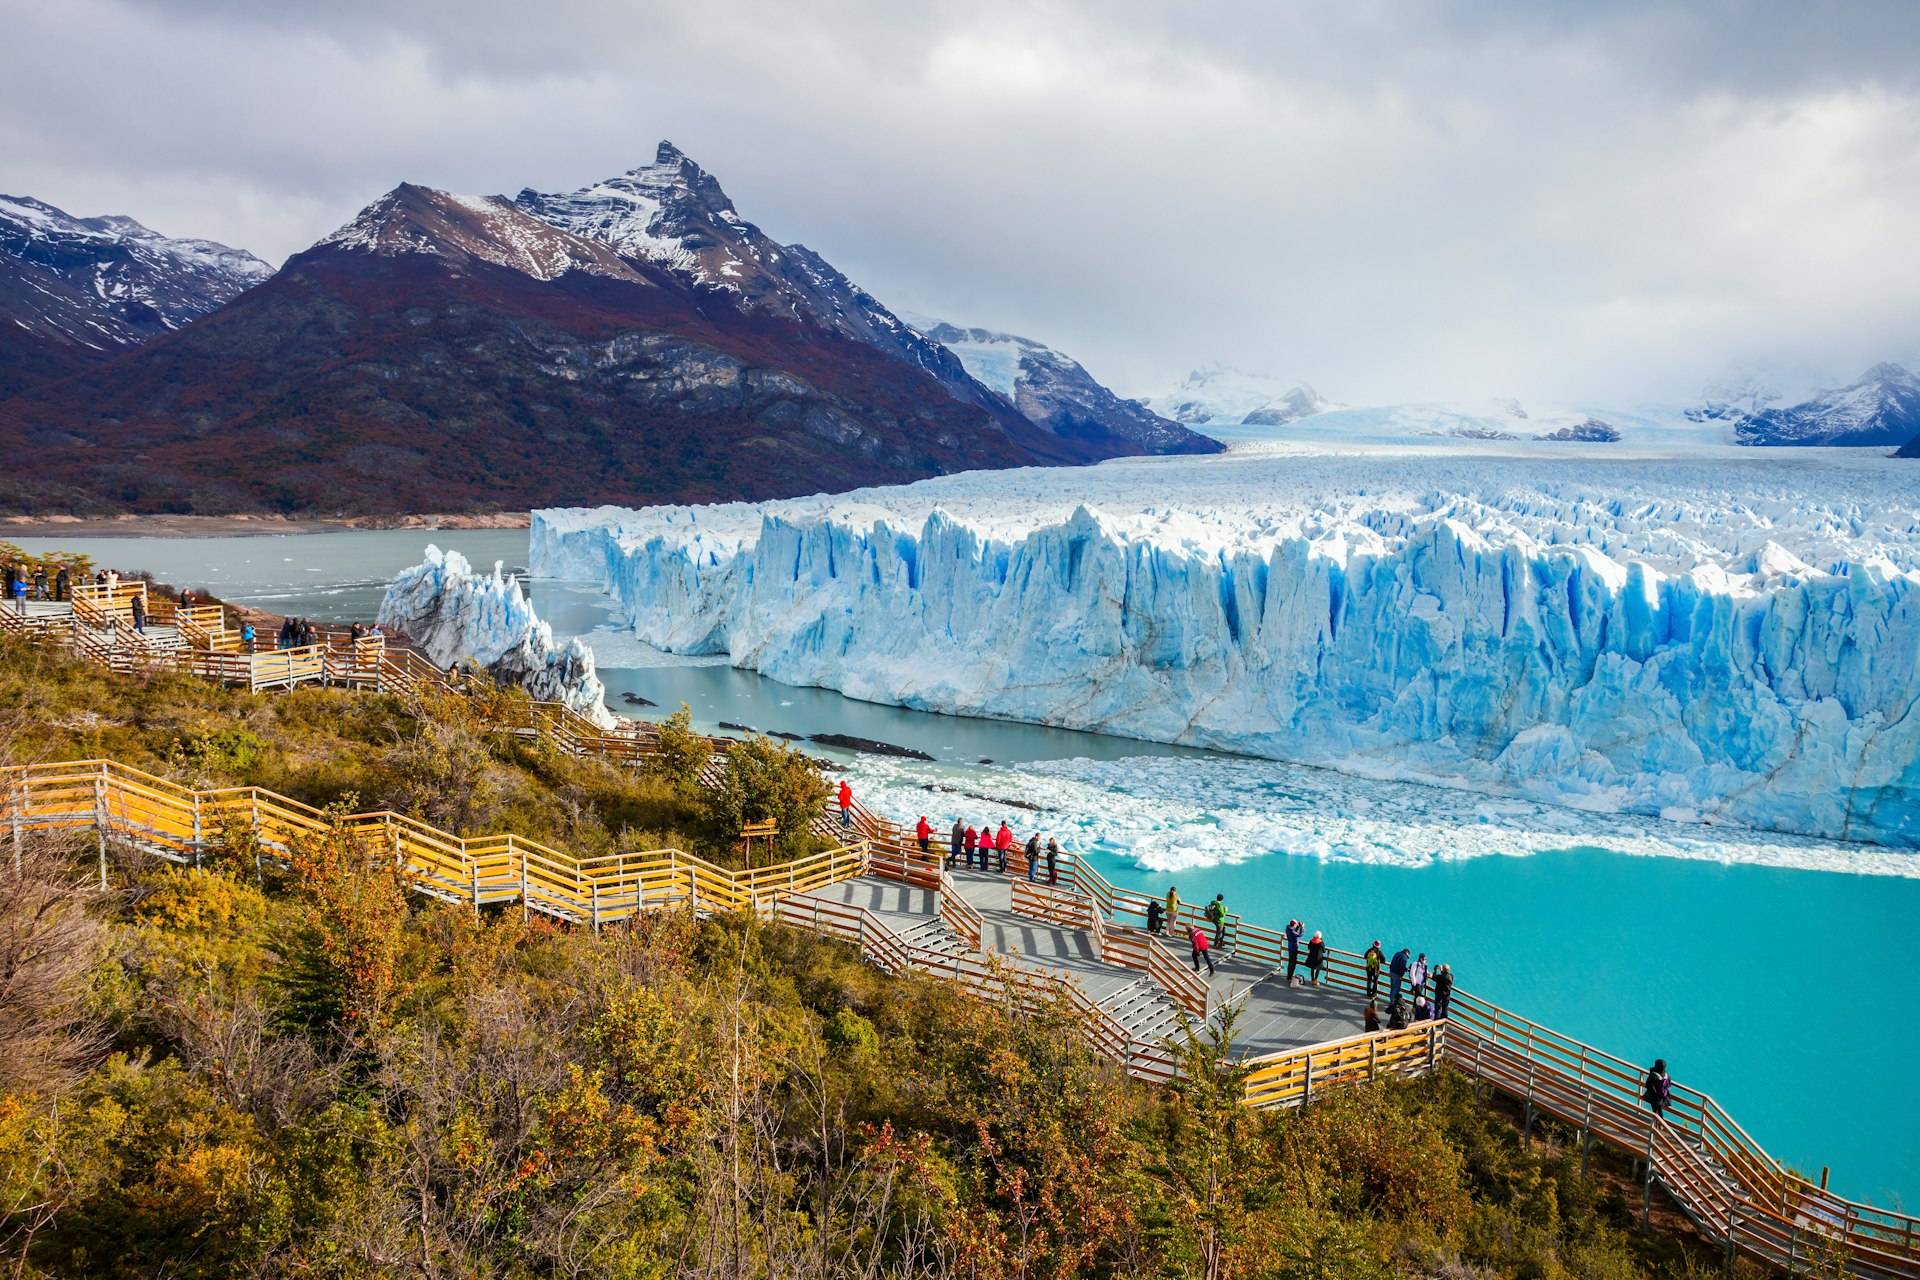 A huge glacier of white ice with a blue tinge stretches out into the distance with rocky peaks either side. A group of tourists admire it from a raised platform